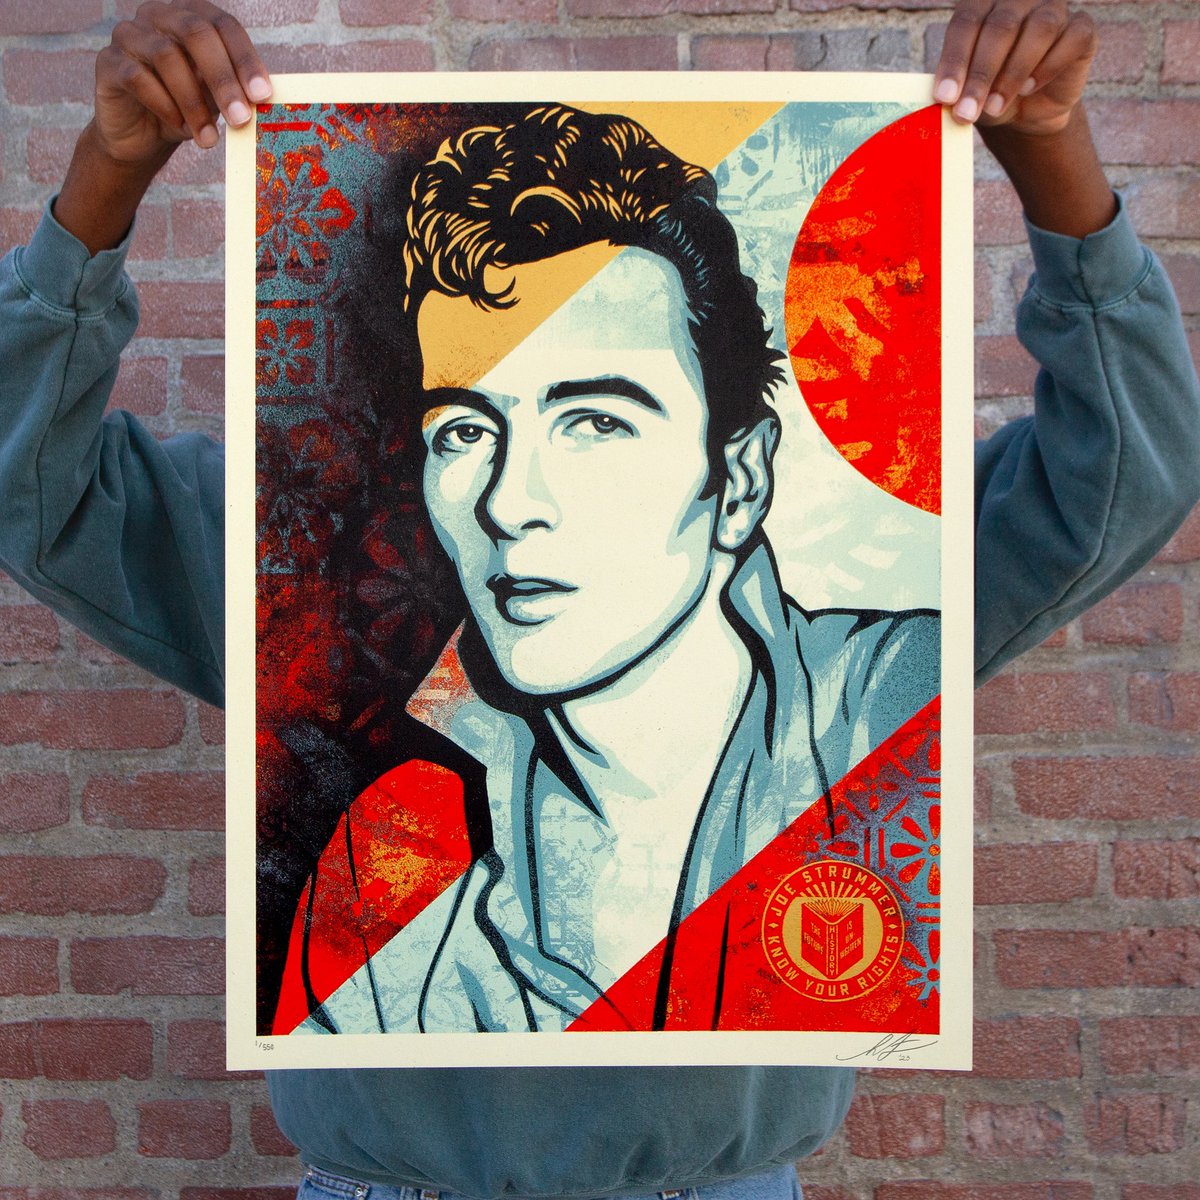 The new @OBEYGIANT Print Release: “Joe Strummer - Know Your Rights” In Collaboration With Photographer Jenny Lens will be available Thurs Nov 16th @ 10 AM PST! A portion of proceeds will benefit the Joe Strummer Fund and Single Homeless Project. obeygiant.com